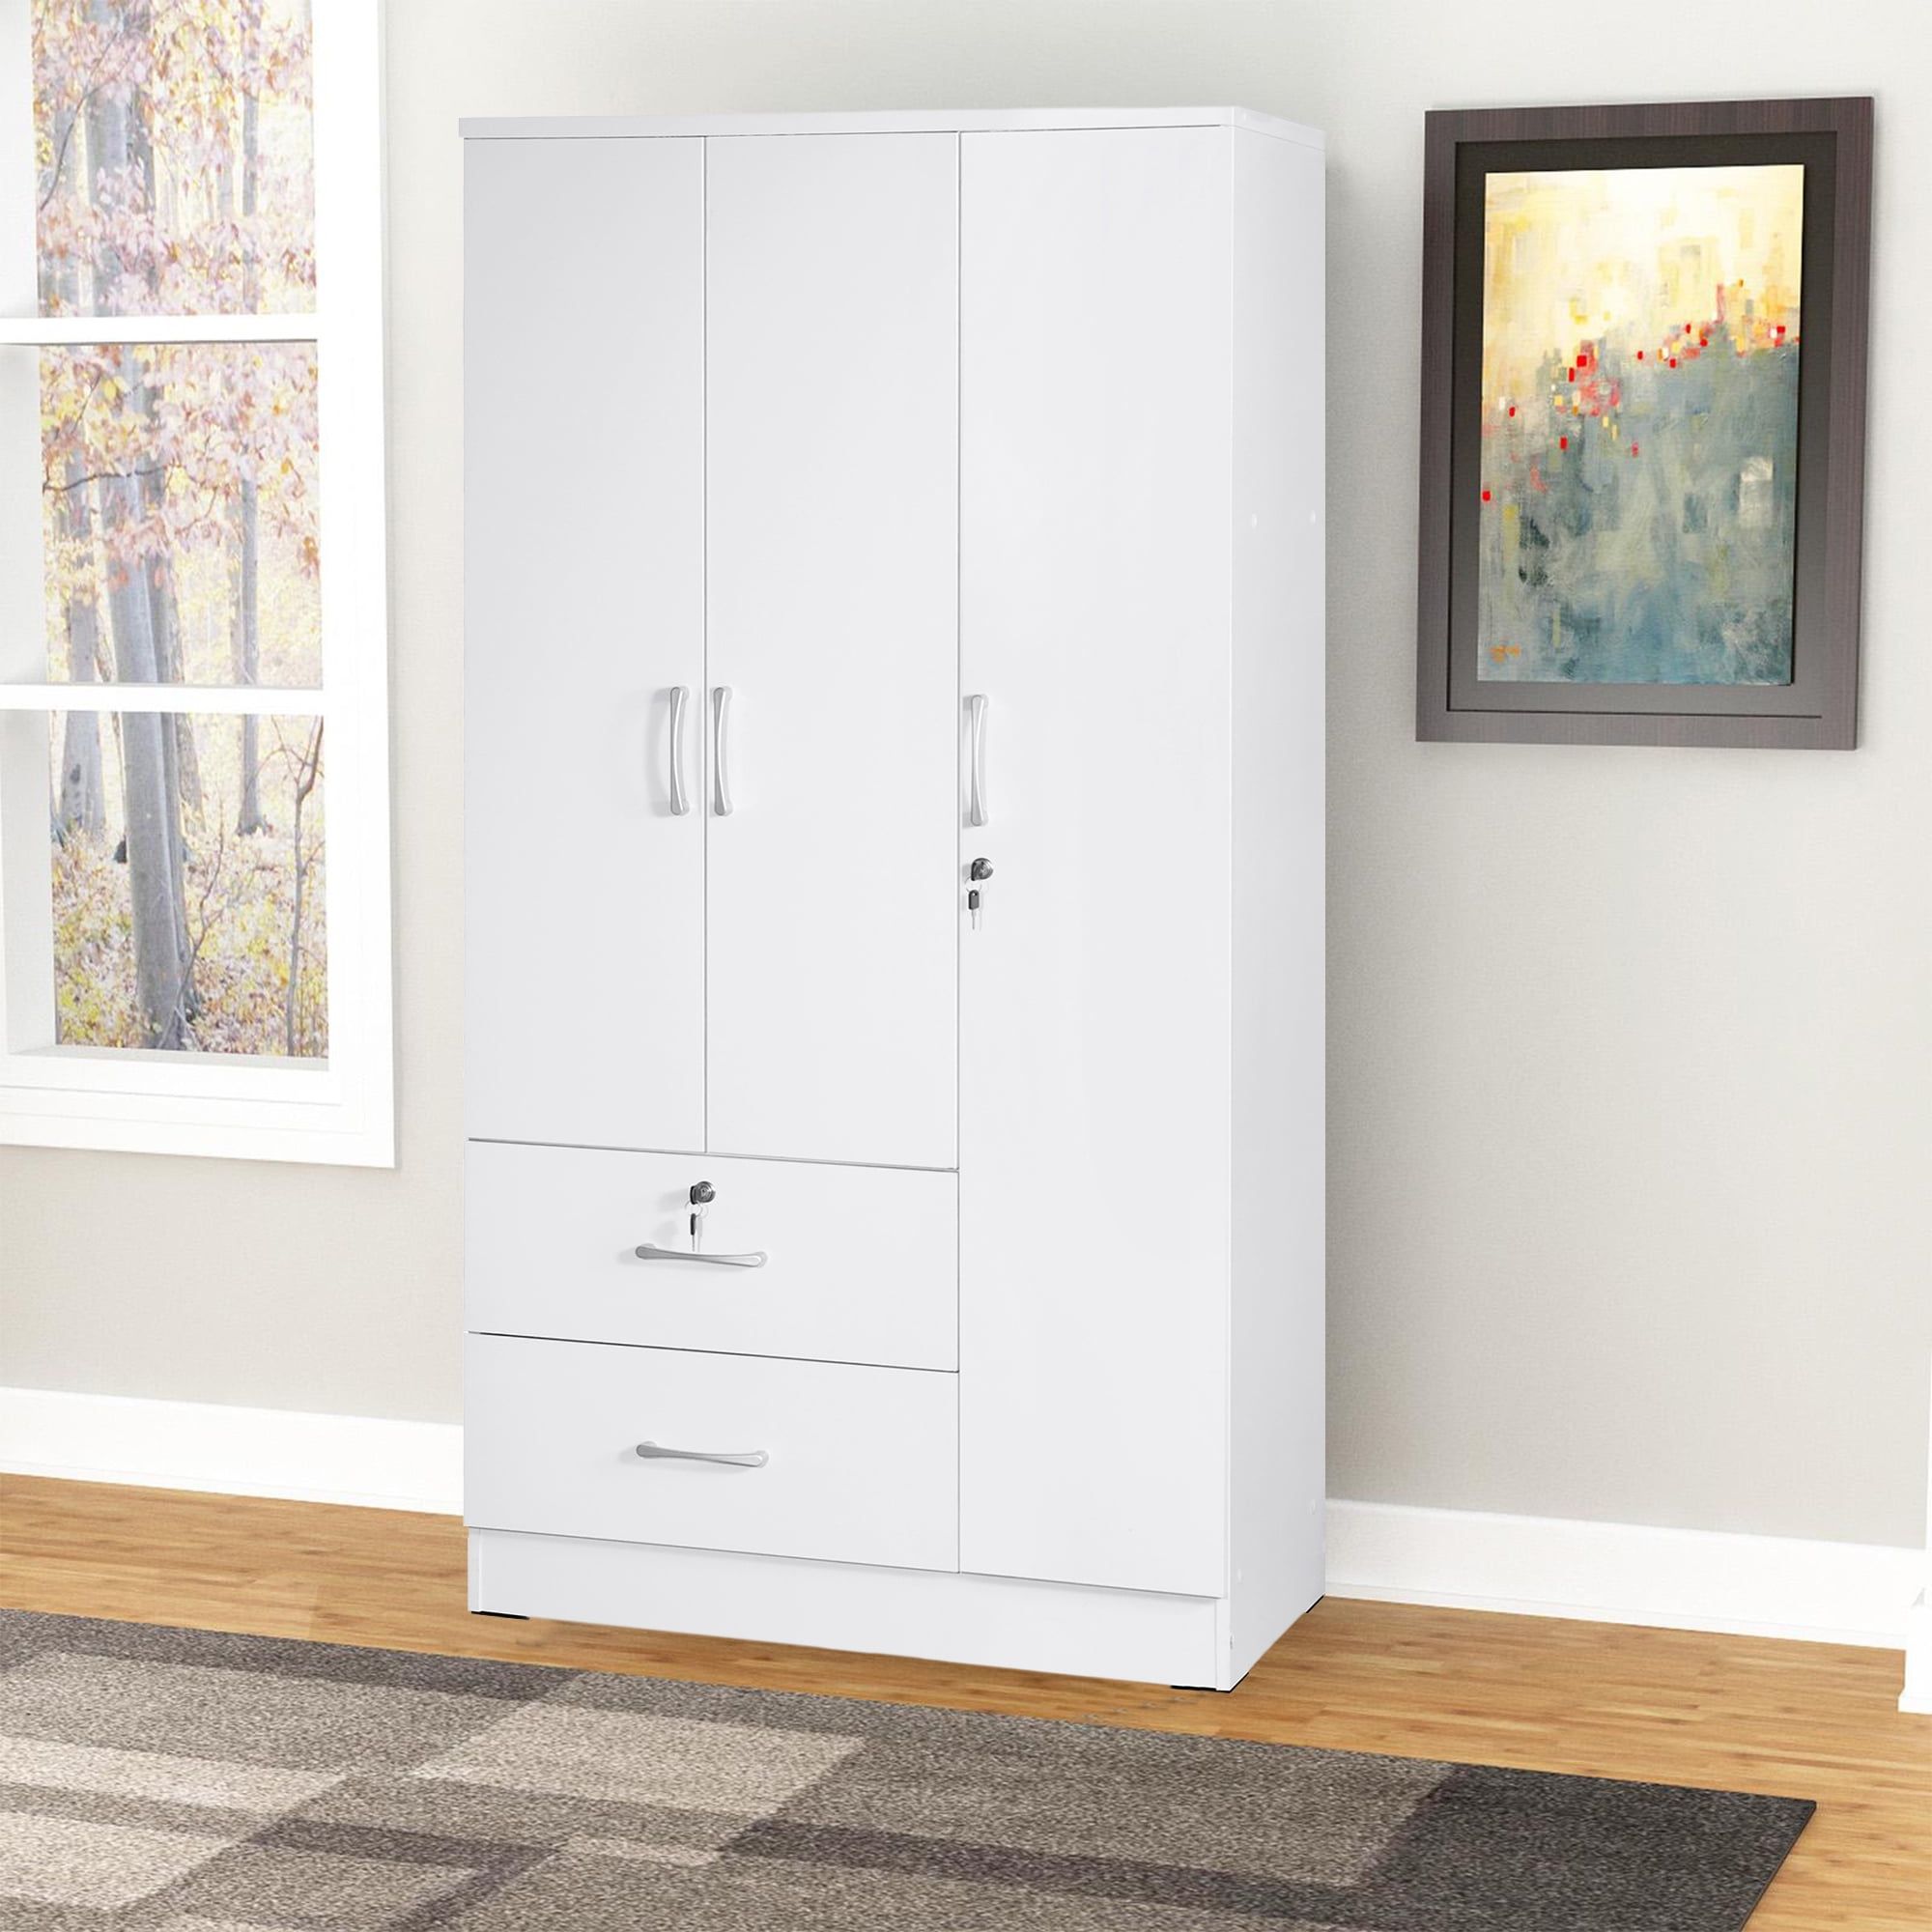 Better Home Products Symphony Wardrobe Armoire Closet With Two Drawers In  White – Walmart Intended For Wardrobes Cheap (View 9 of 15)